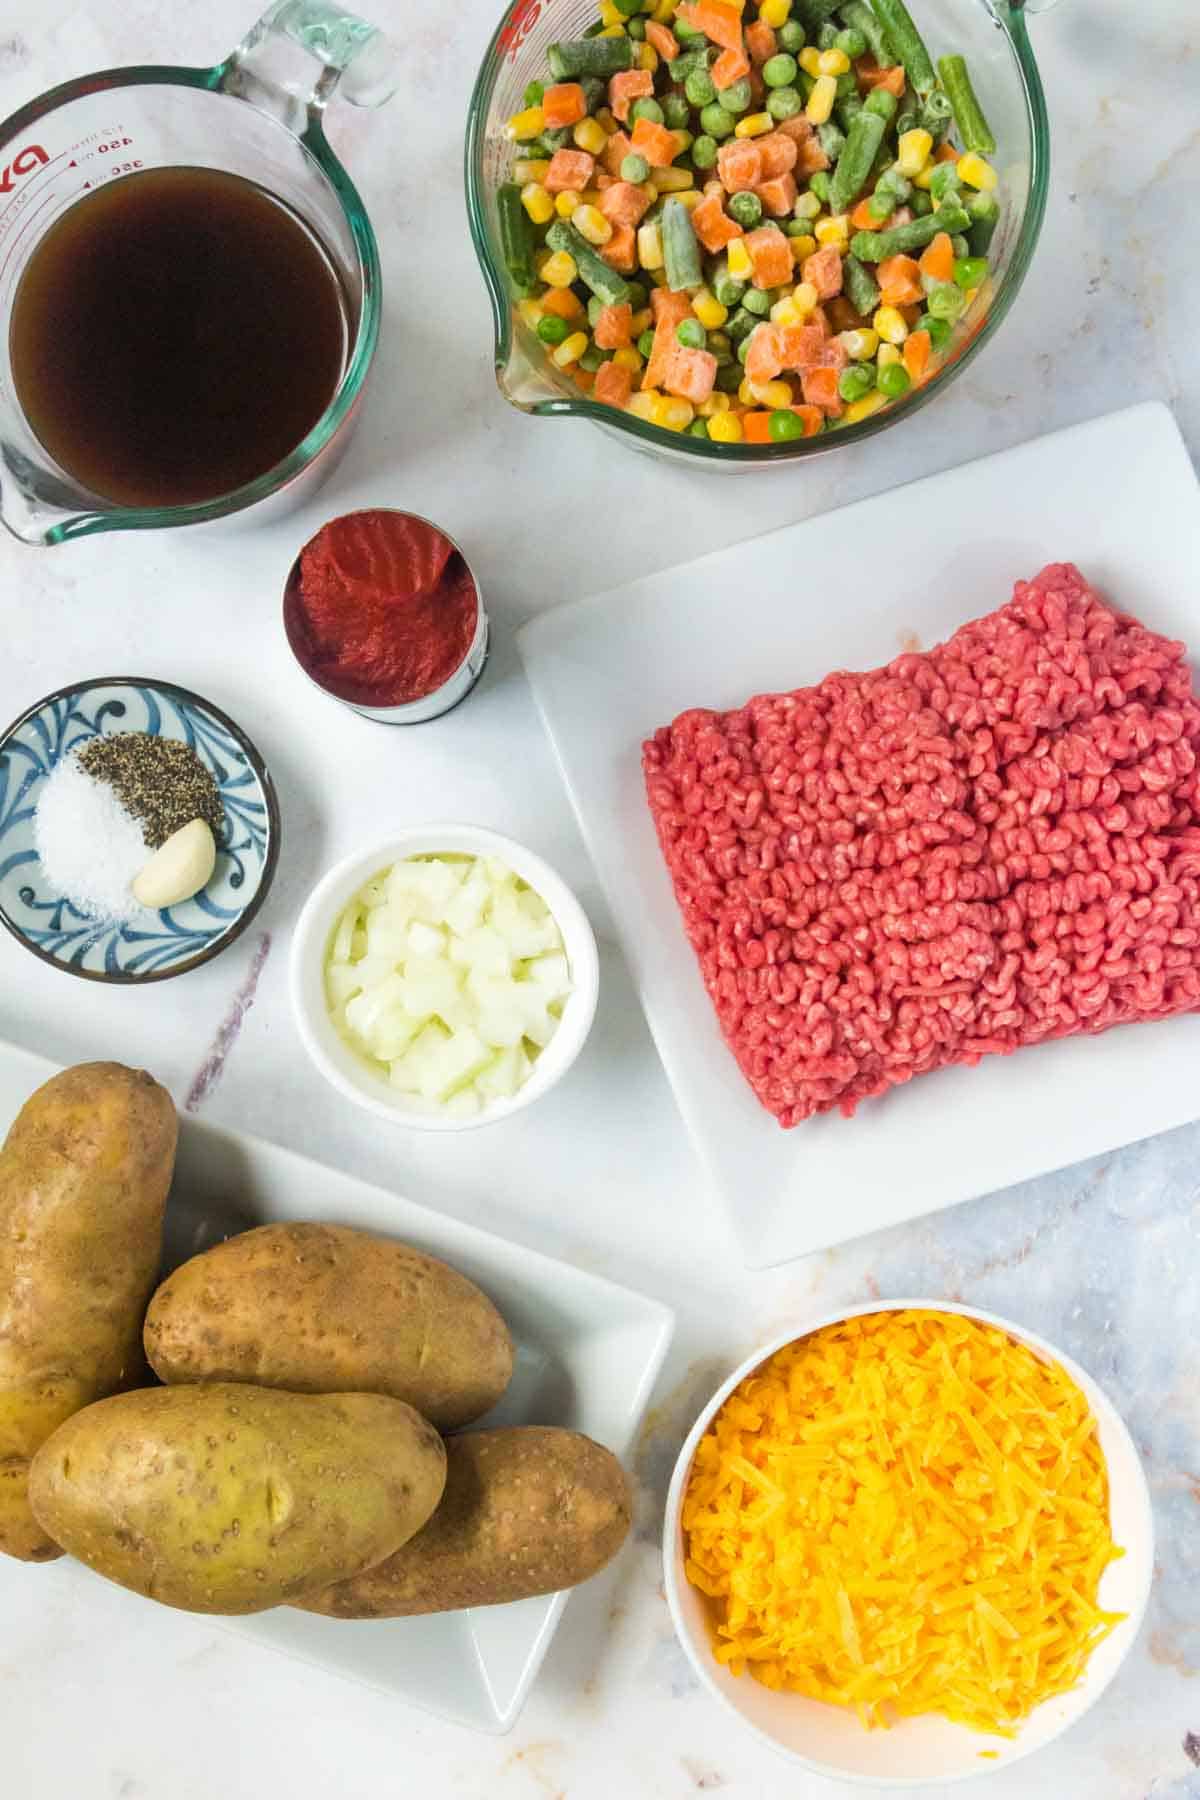 Bowls and plates of ingredients to make cottage pie baked potatoes.